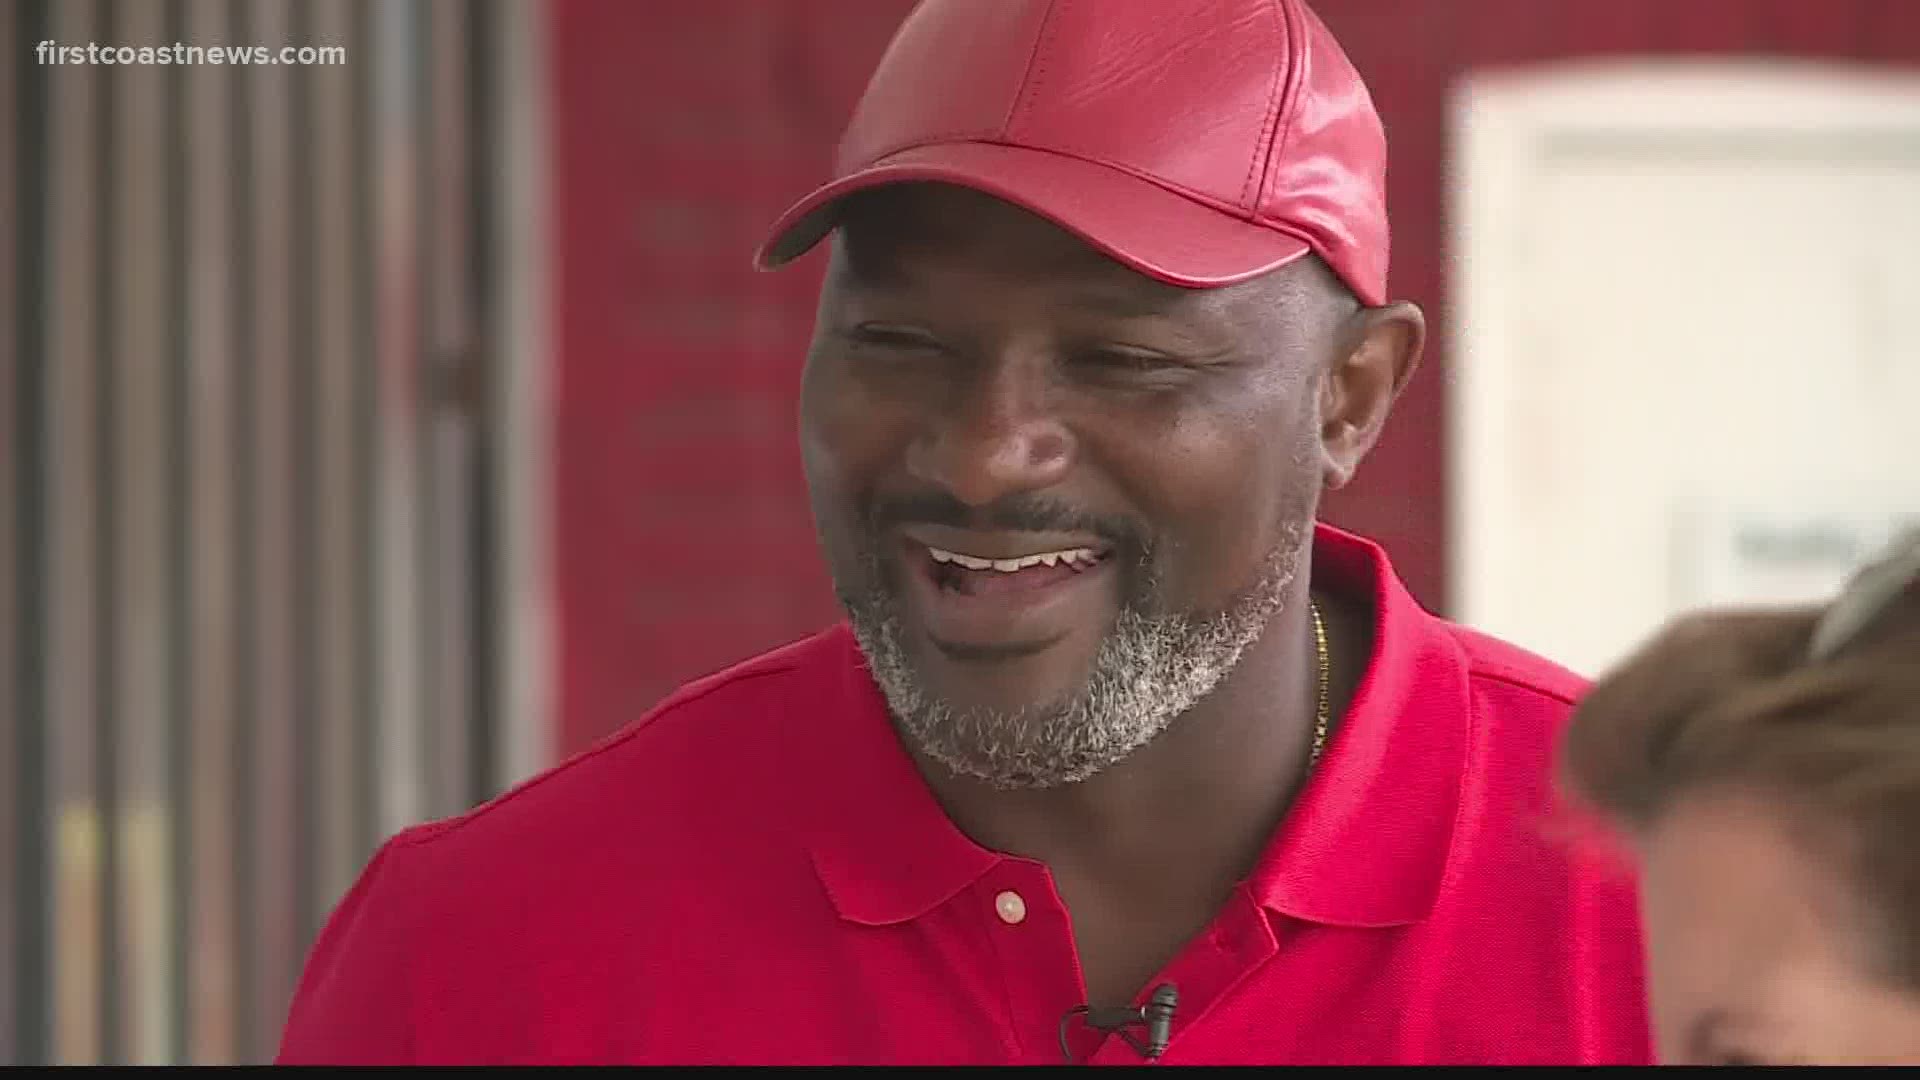 In a bizarre twist, a man released from prison after 29 years could be sent back, leaving behind his new home, wife and two jobs.